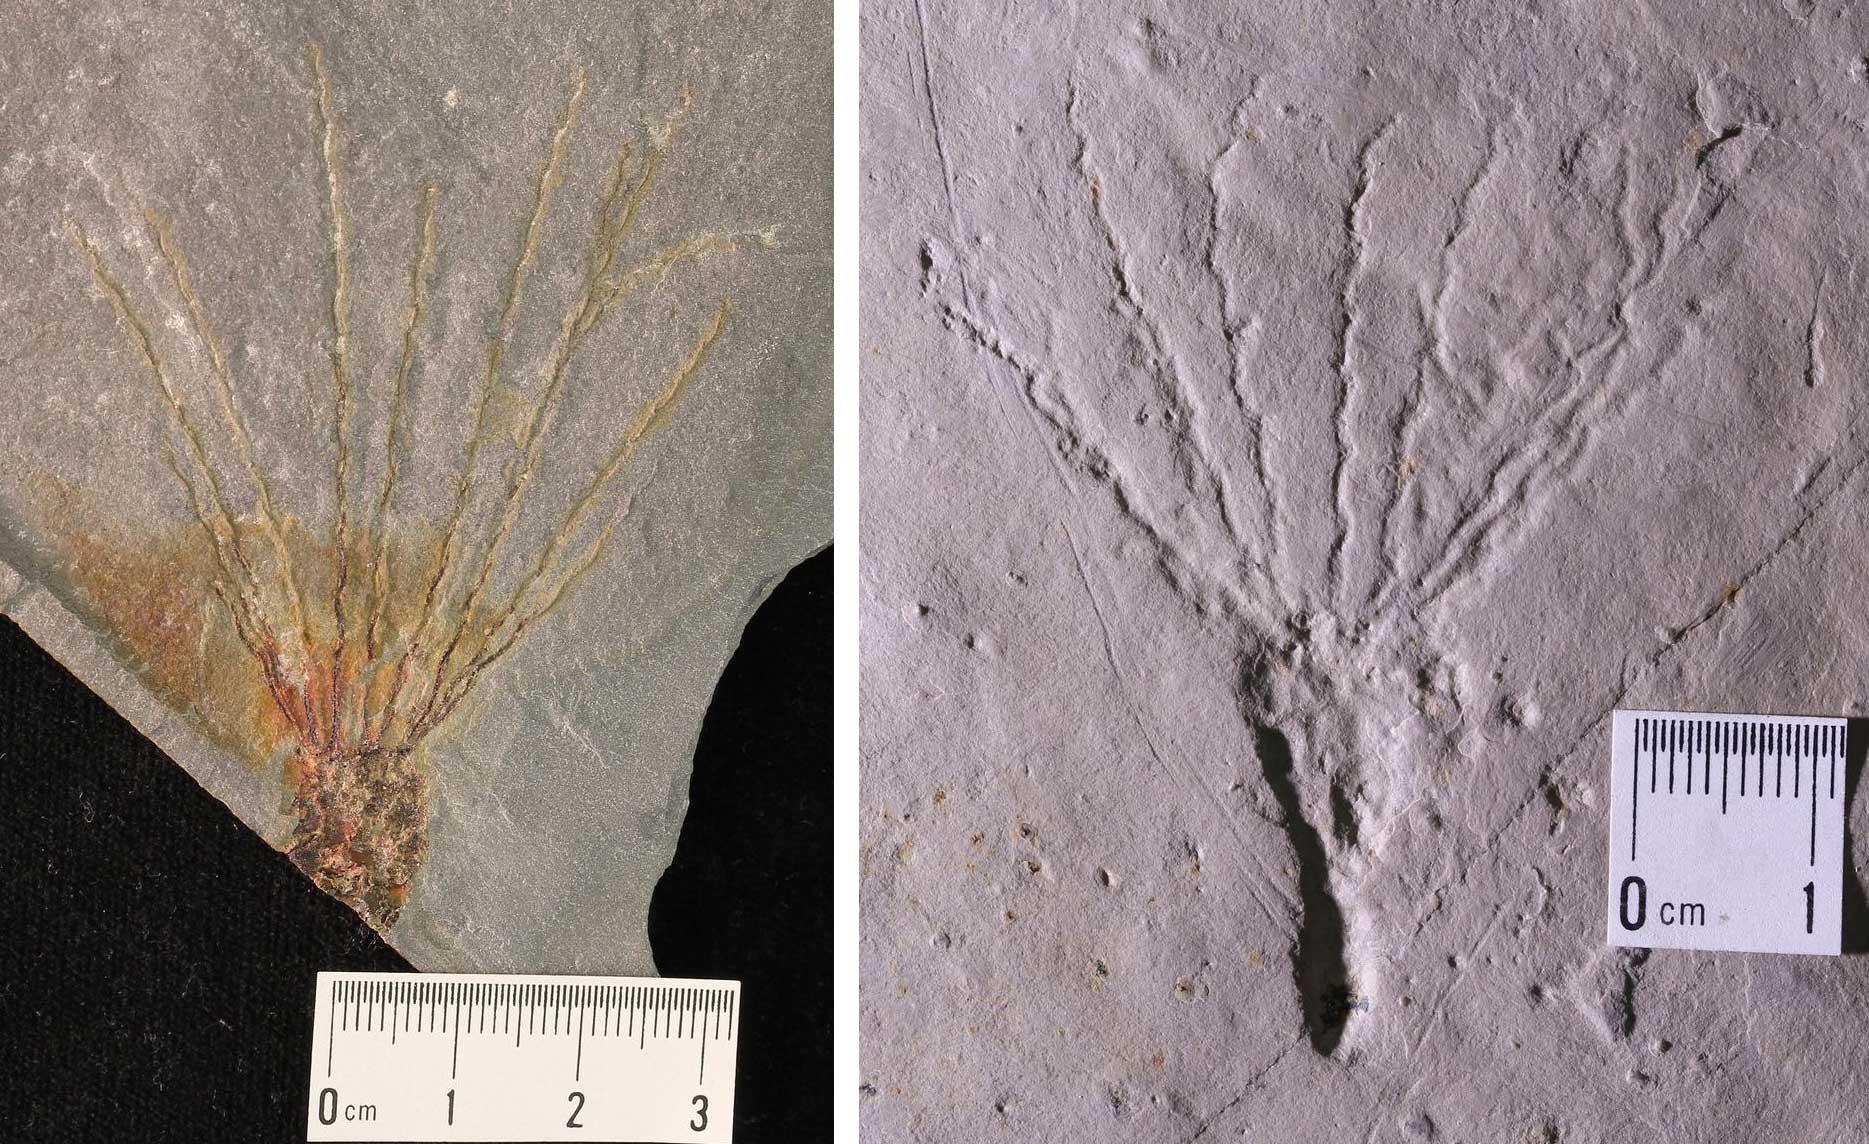 2-Panel image of fossils echinoderms from the Cambrian of Utah. Each specimen has a cone-shaped calyx with many small radiating arms coming from the top. The specimen in the left image also has a short, stout stalk. Scale bars show specimens are several centimeters long.